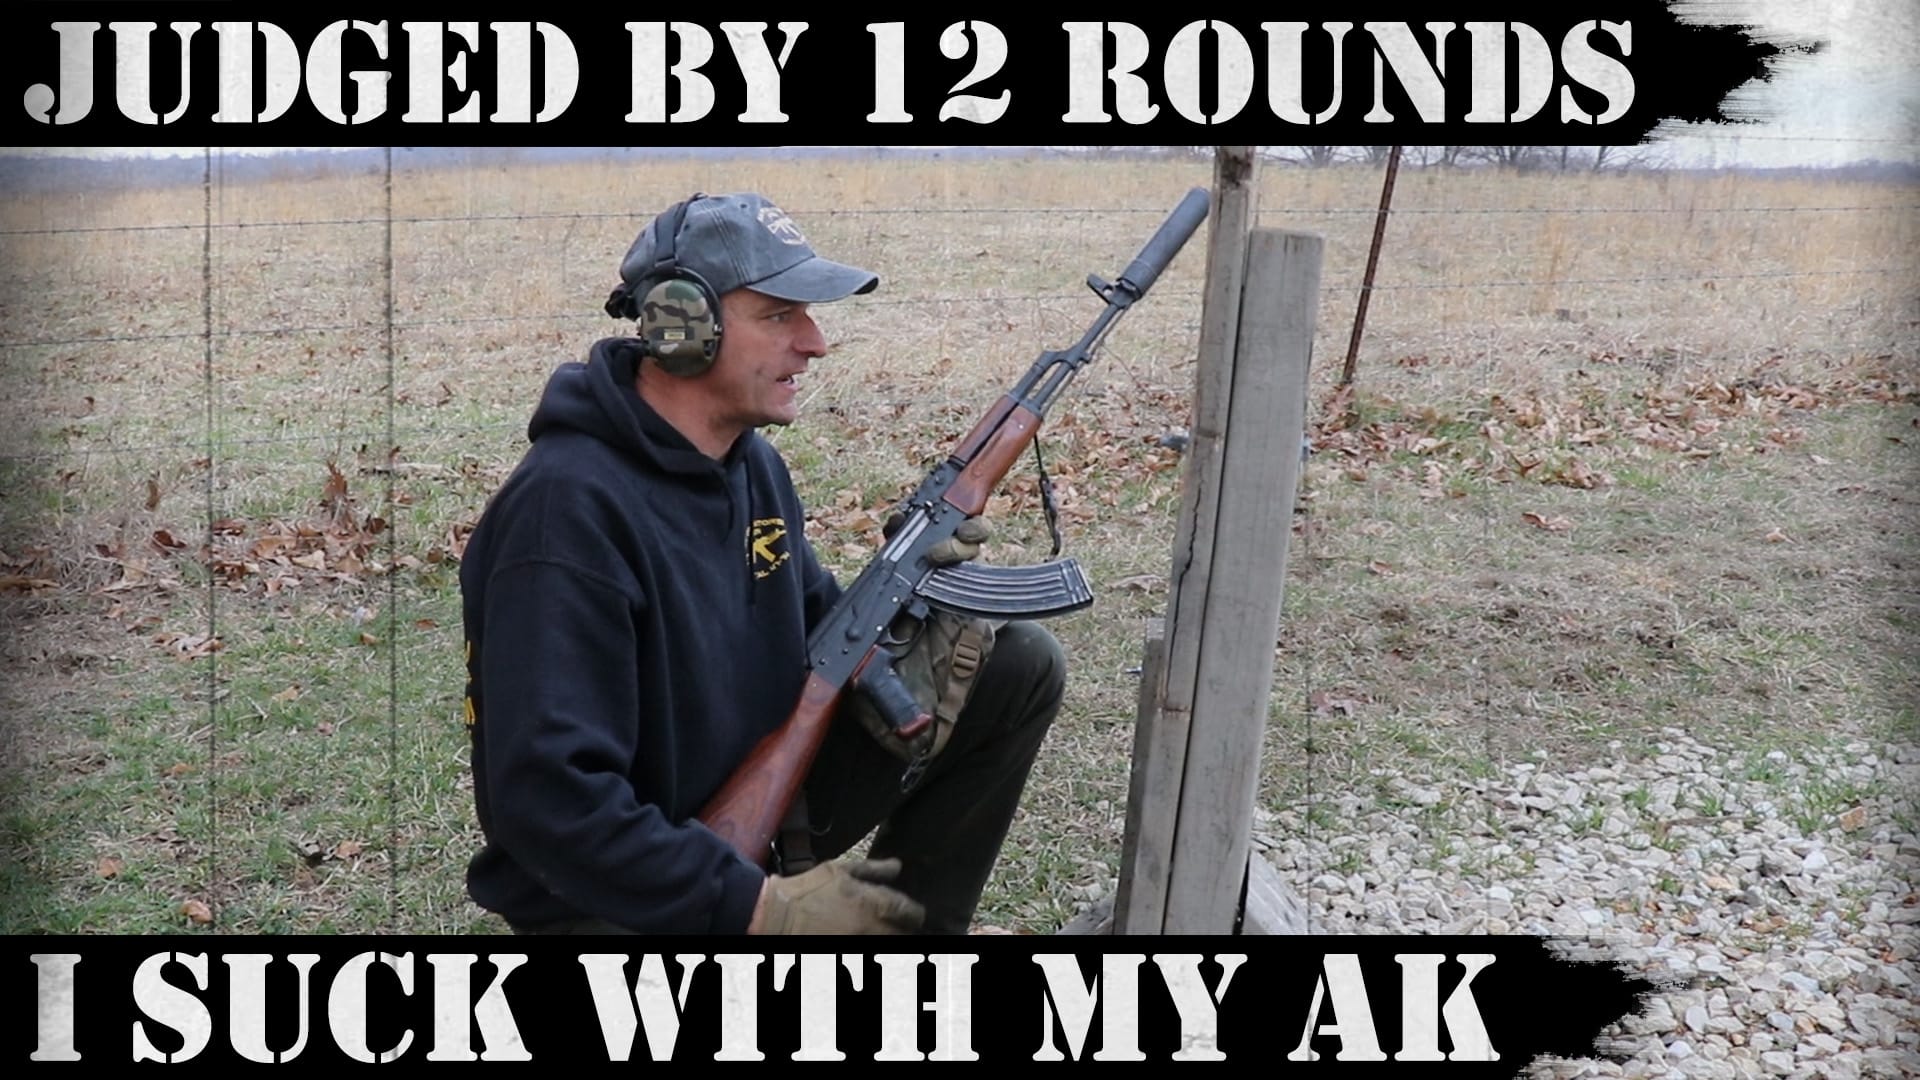 Judged by 12 rounds – I SUCK WITH MY AK!